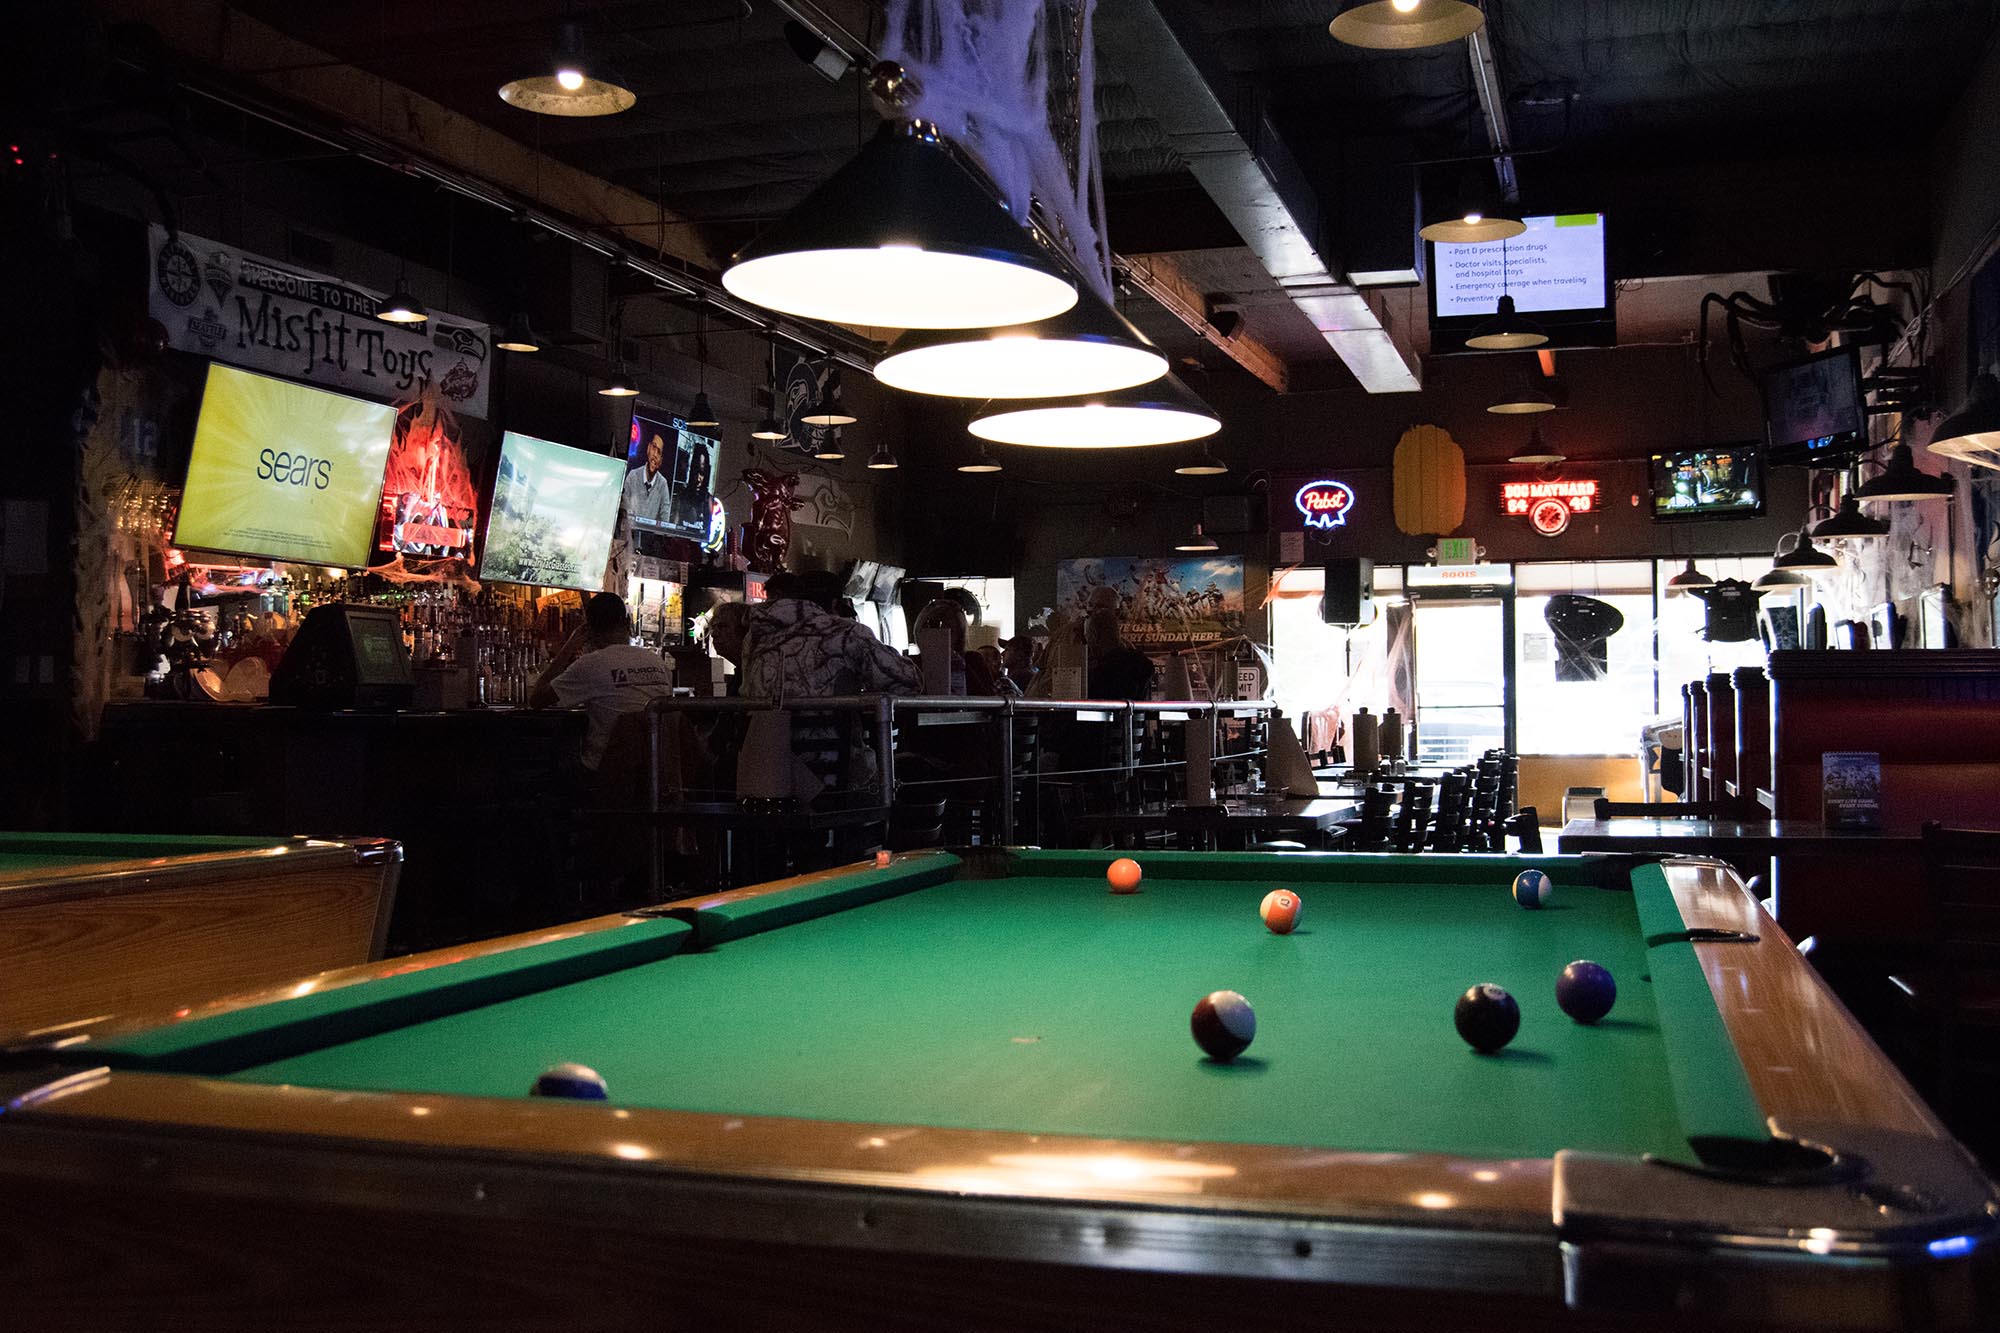 Play pool or grab a drink at Firestarter Bar and Grill in Kent, Washington